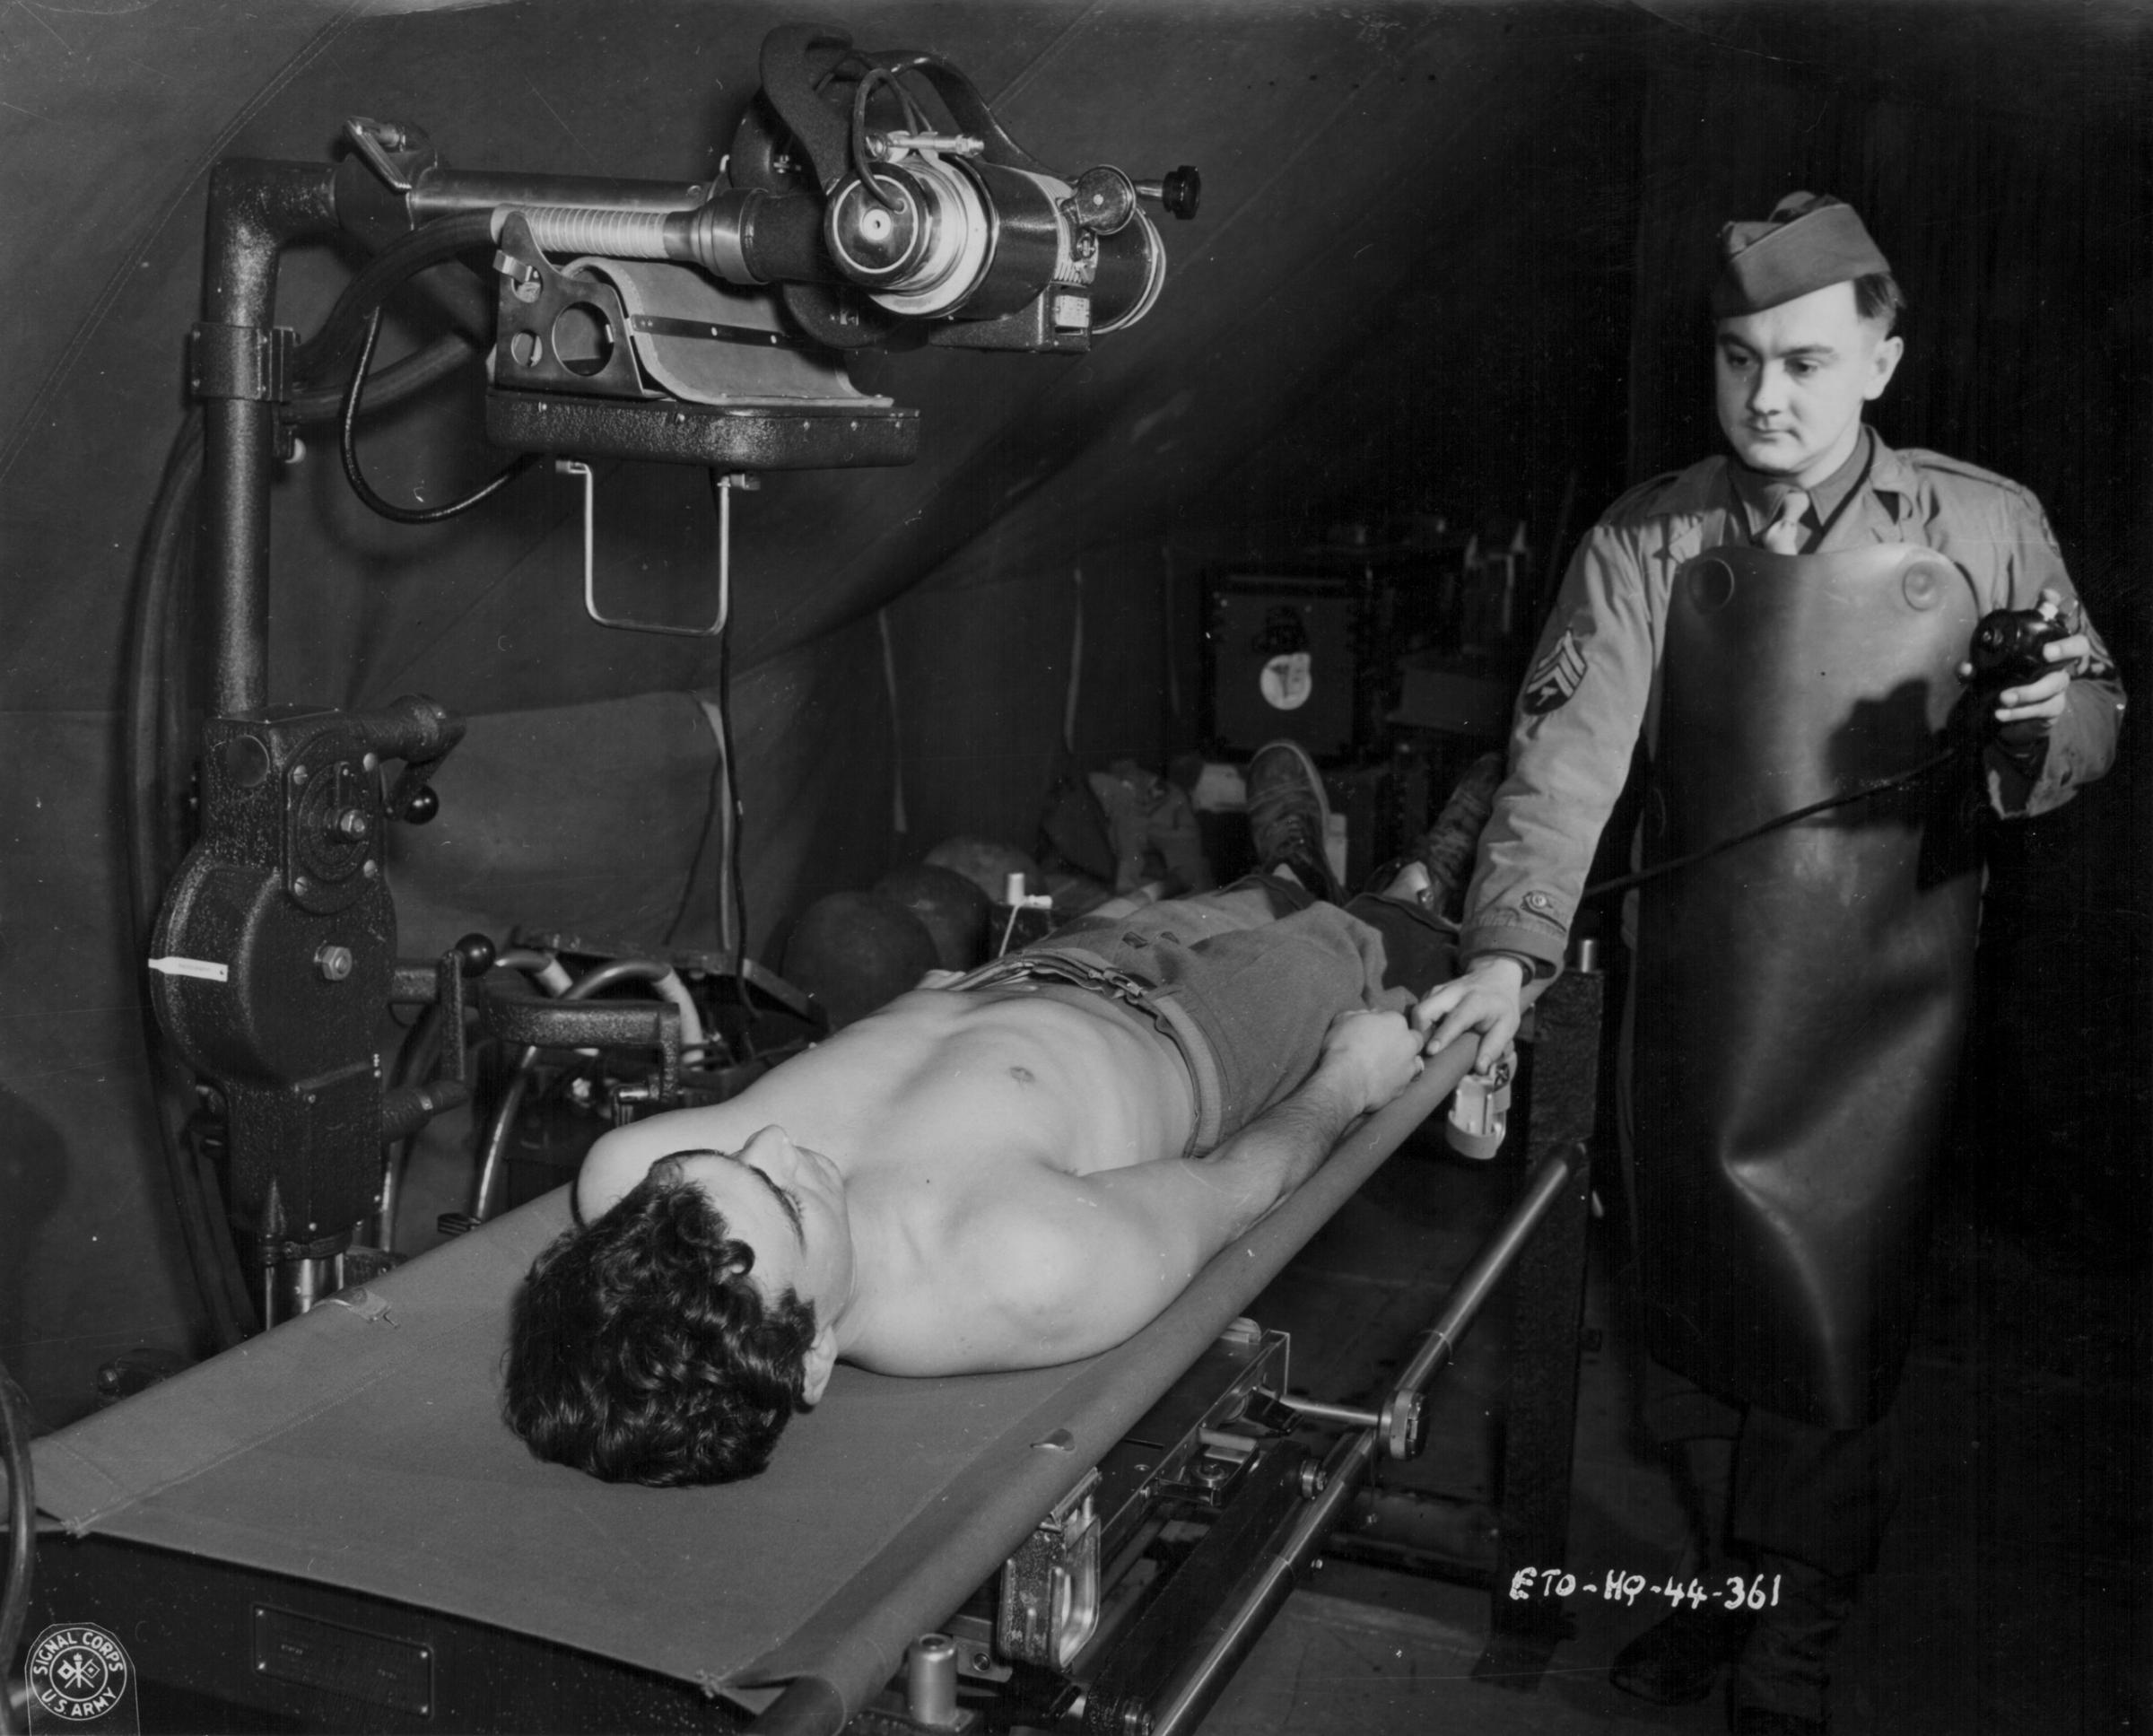 An x-ray technician with the US Medical Corps tending to a wounded soldier during World War Two, circa 1941-1945.